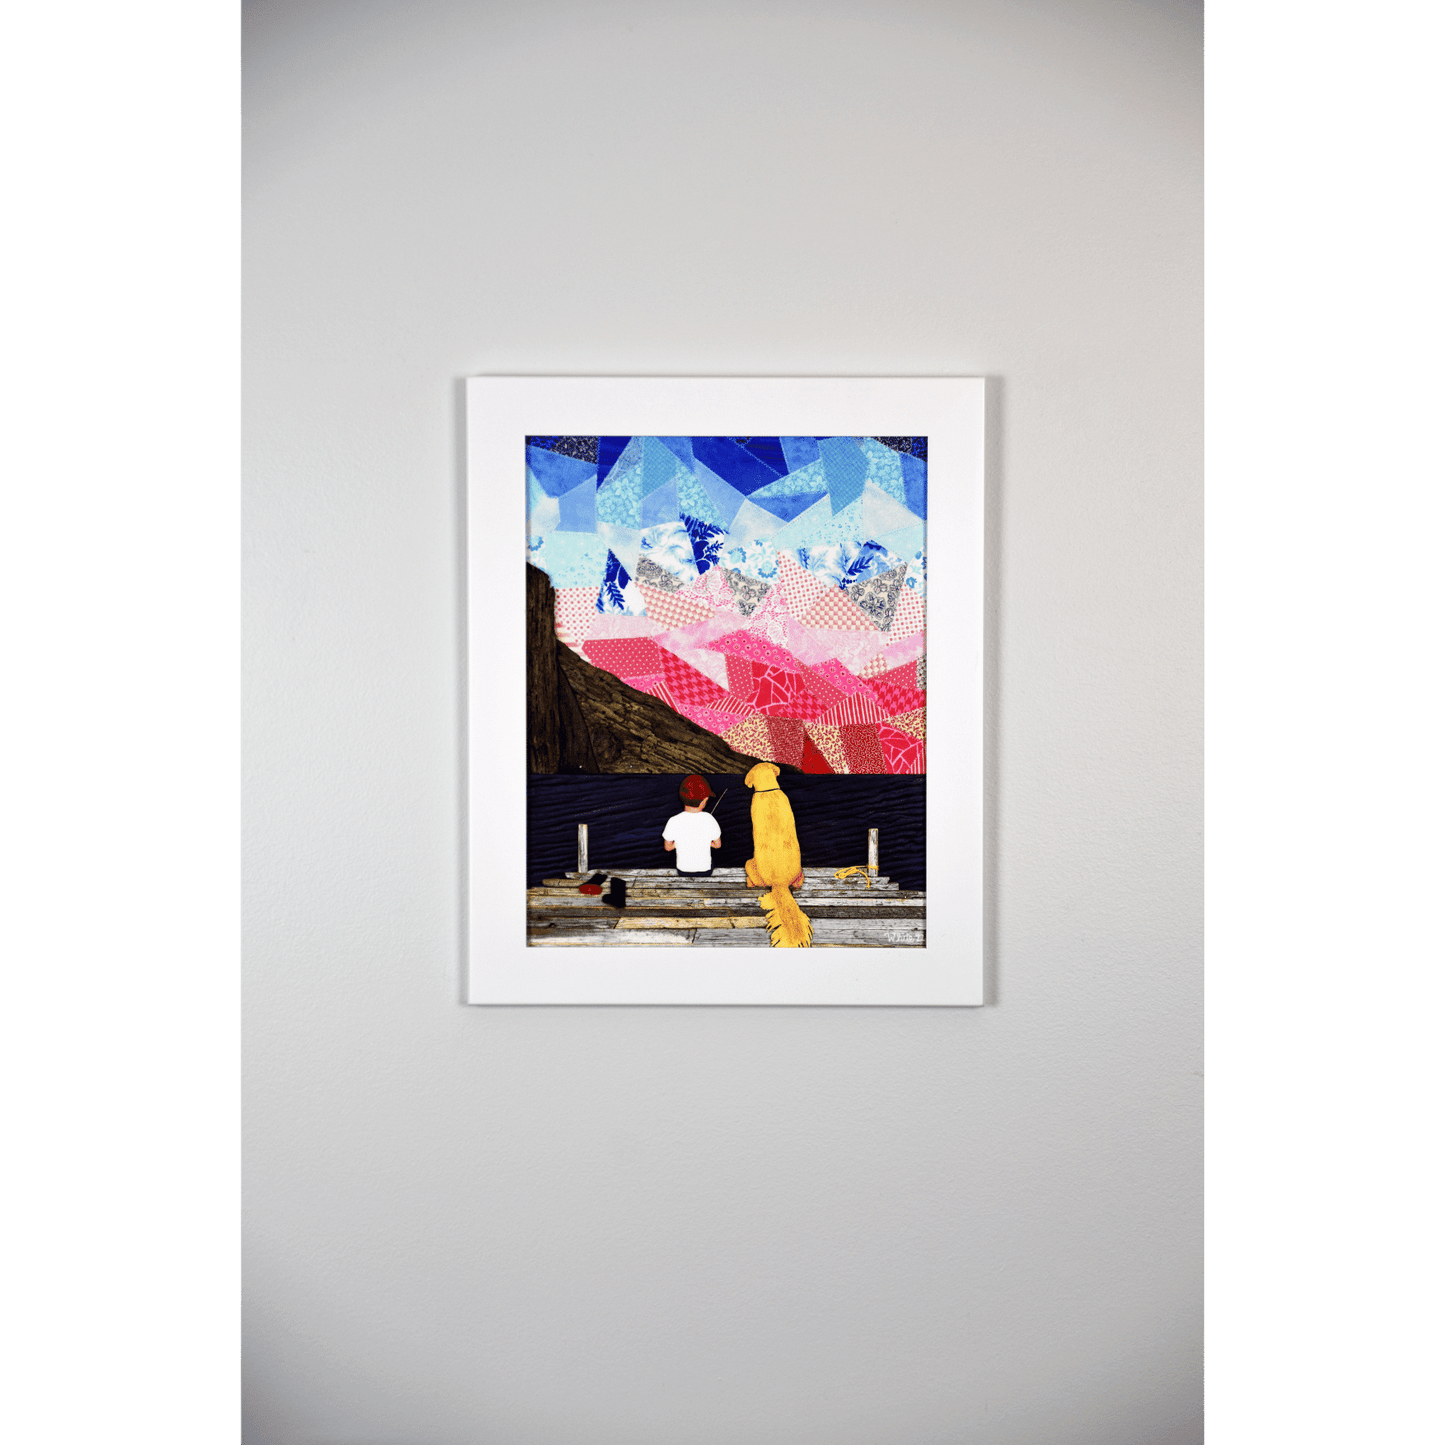 "A Boy and his Dog" print showcases a serene image of a boy sitting on a pier with his loyal yellow Labrador beside him, set against an ocean and sky backdrop.